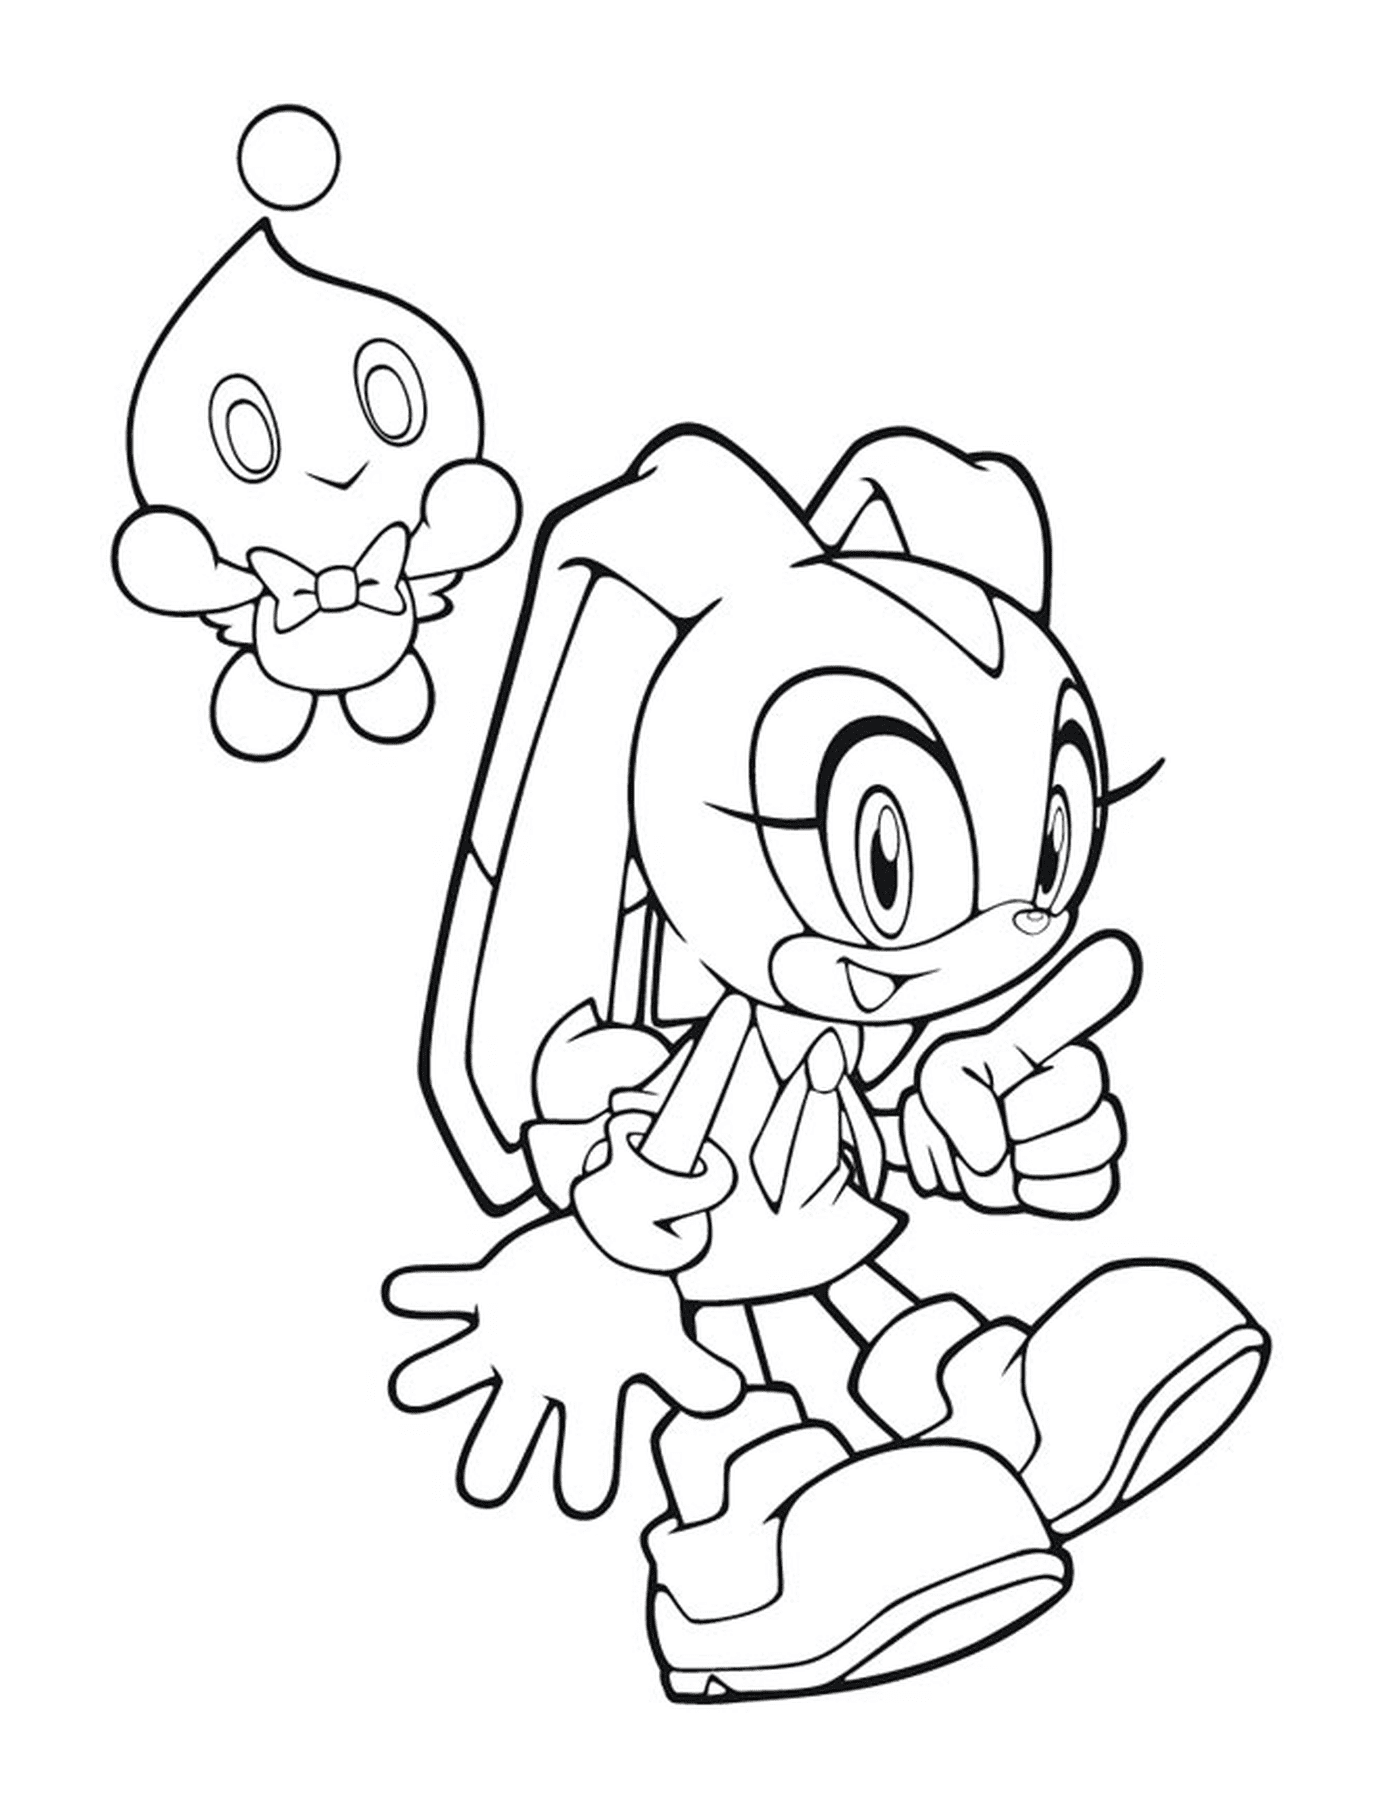  A character from Sonic the Hedgehog 